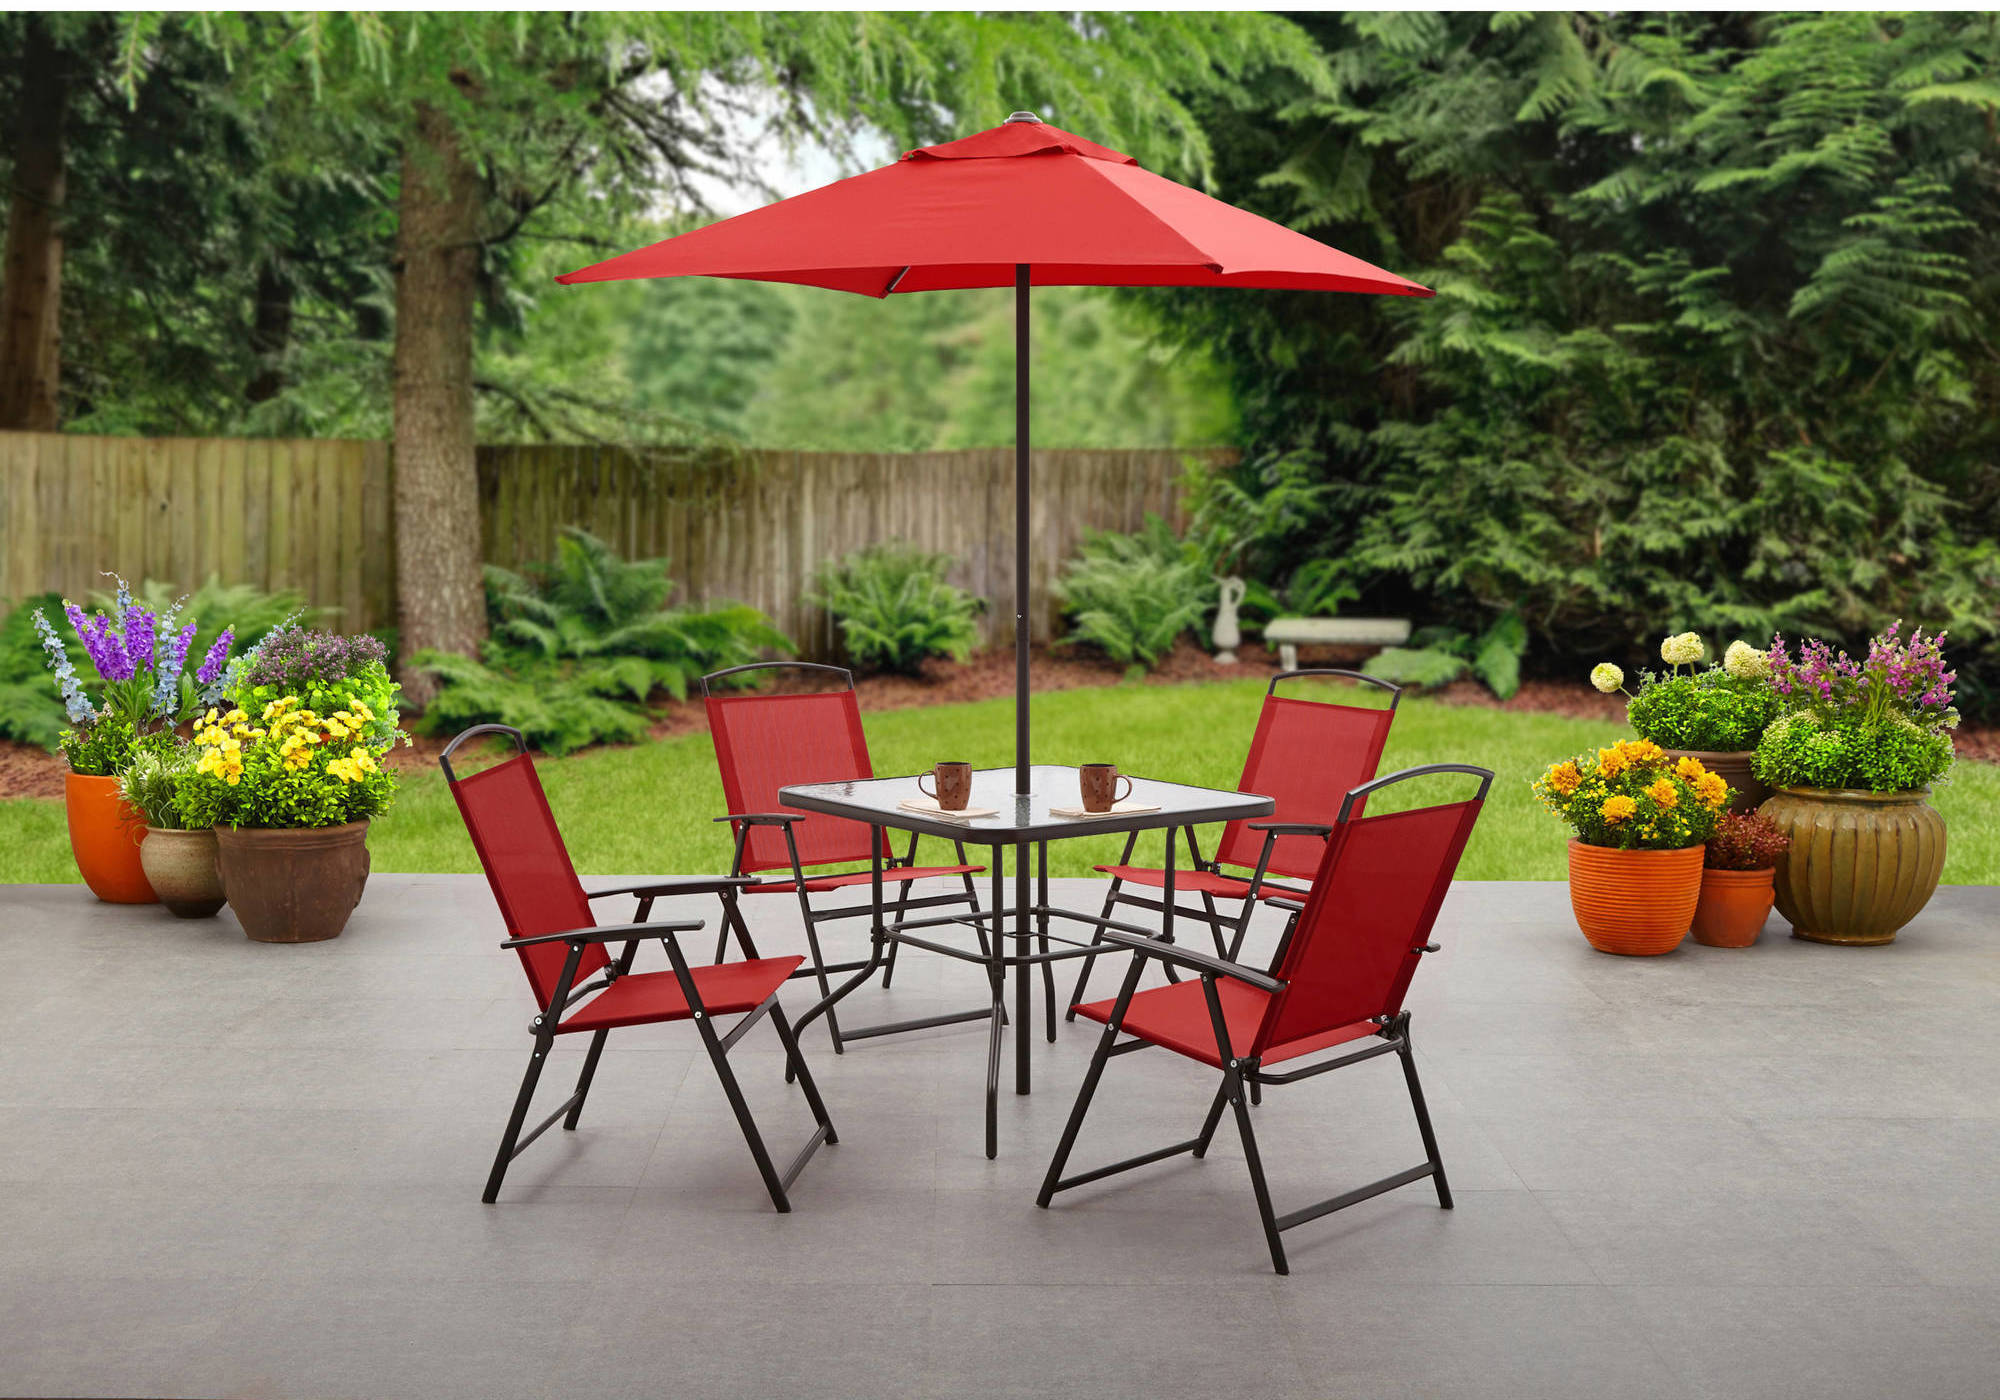 Cheap Patio Furniture for Sale & Discount Outdoor Patio Furniture